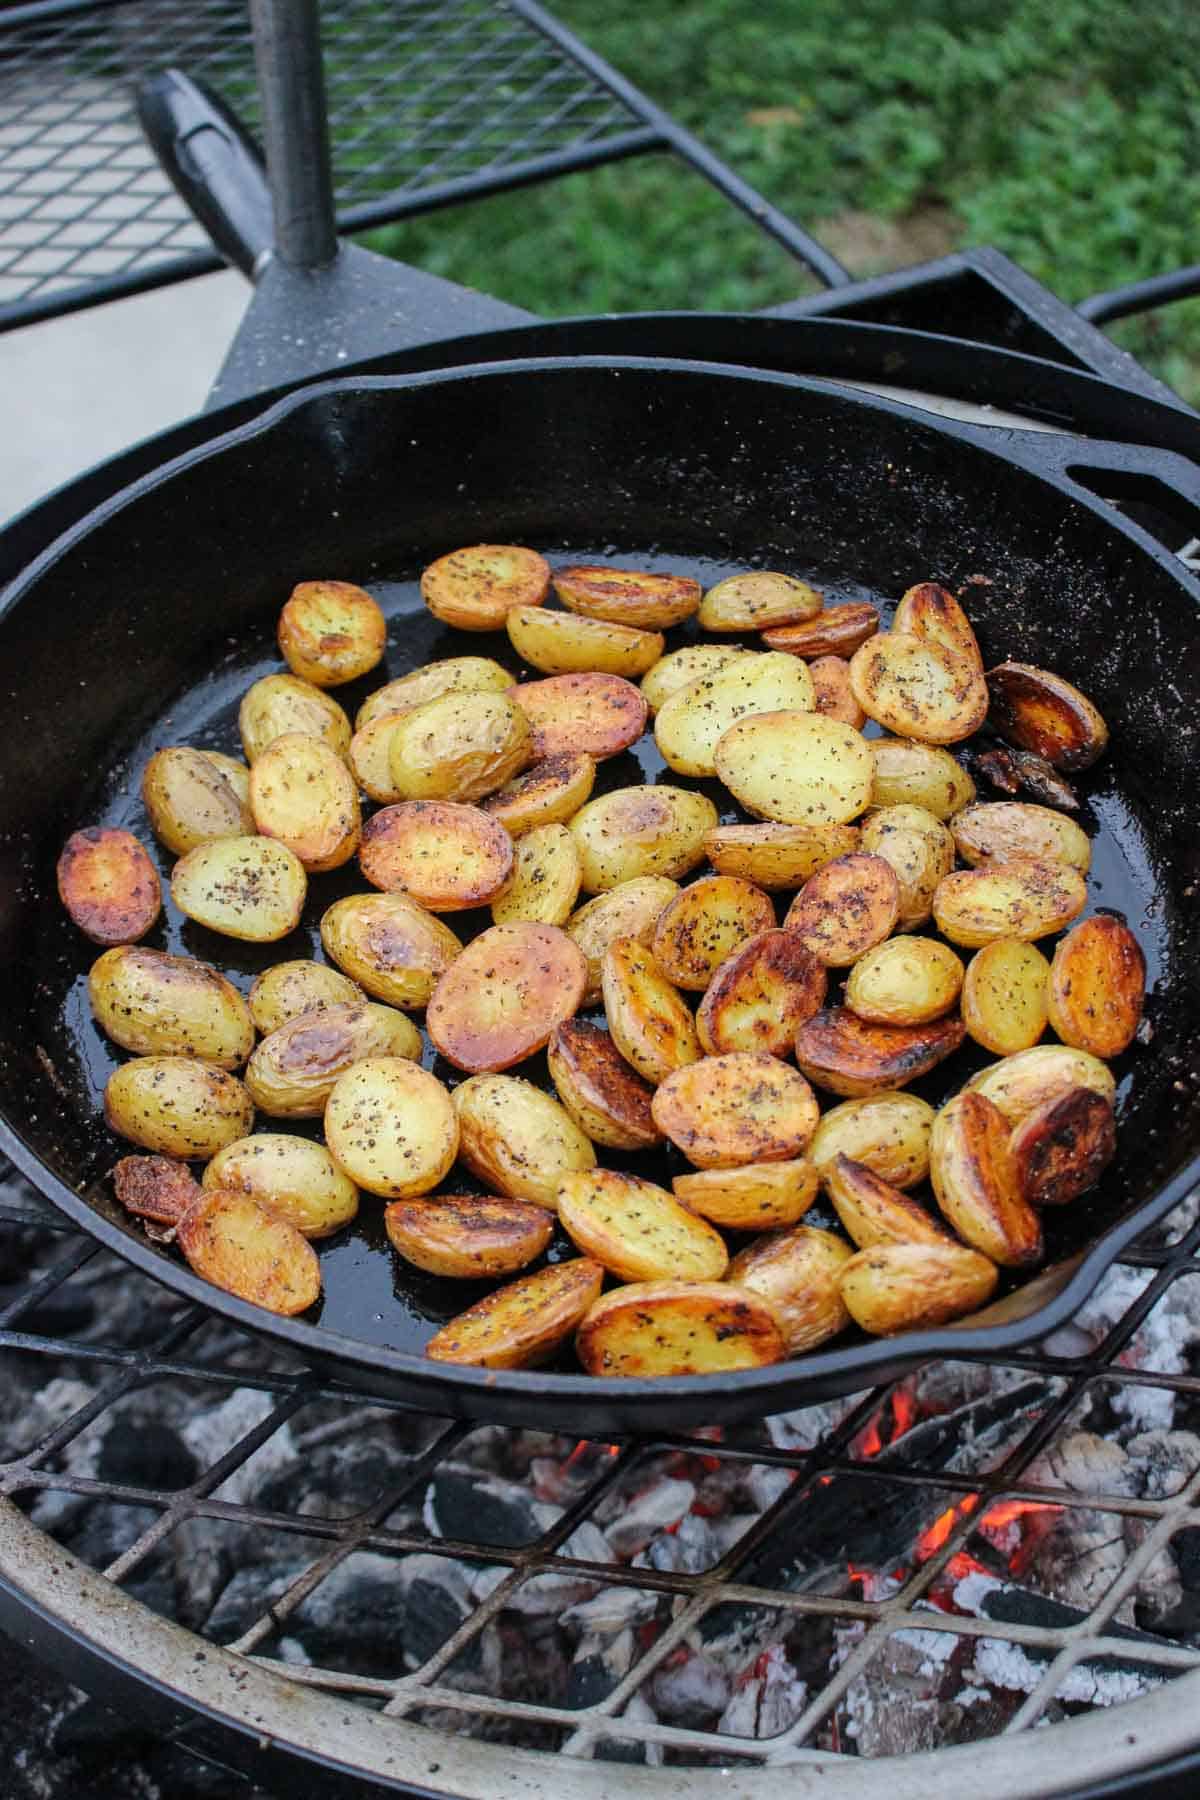 The roasted potatoes that are golden brown and ready to be served along side the steak onion skewers. 